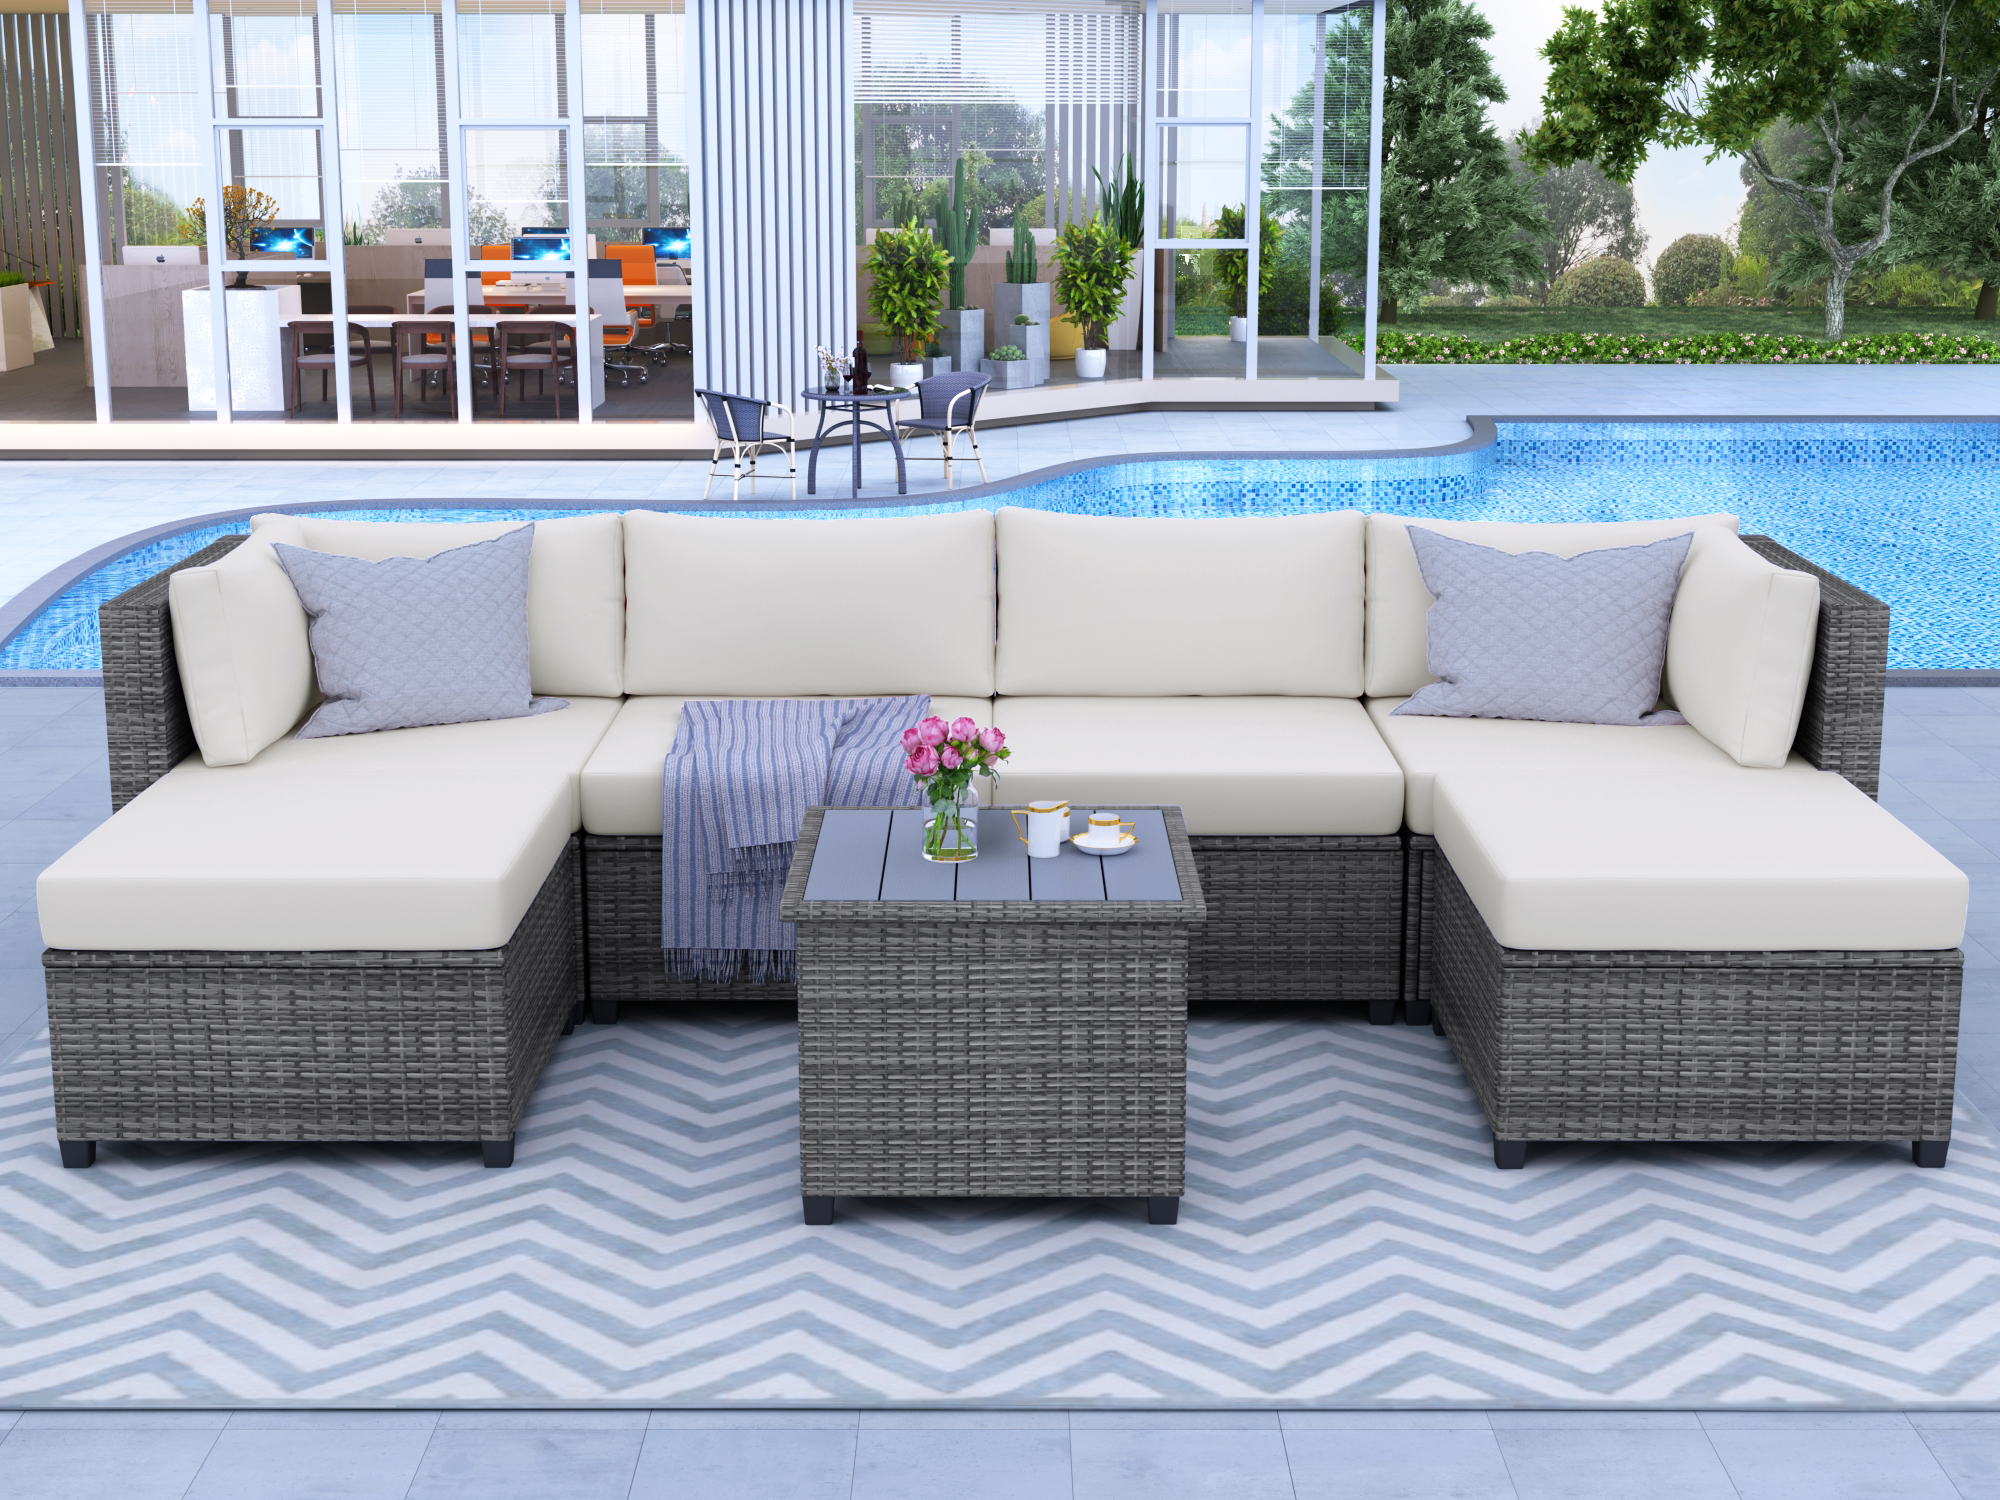 7 Piece Patio Sectional Sofa Set with 4 PE Wicker Sofas, 2 Ottoman, Coffee Table, All-Weather Outdoor Conversation Set Patio Furniture Sets with Beige Cushions for Backyard, Porch, Garden, Pool, LLL19 - image 2 of 9